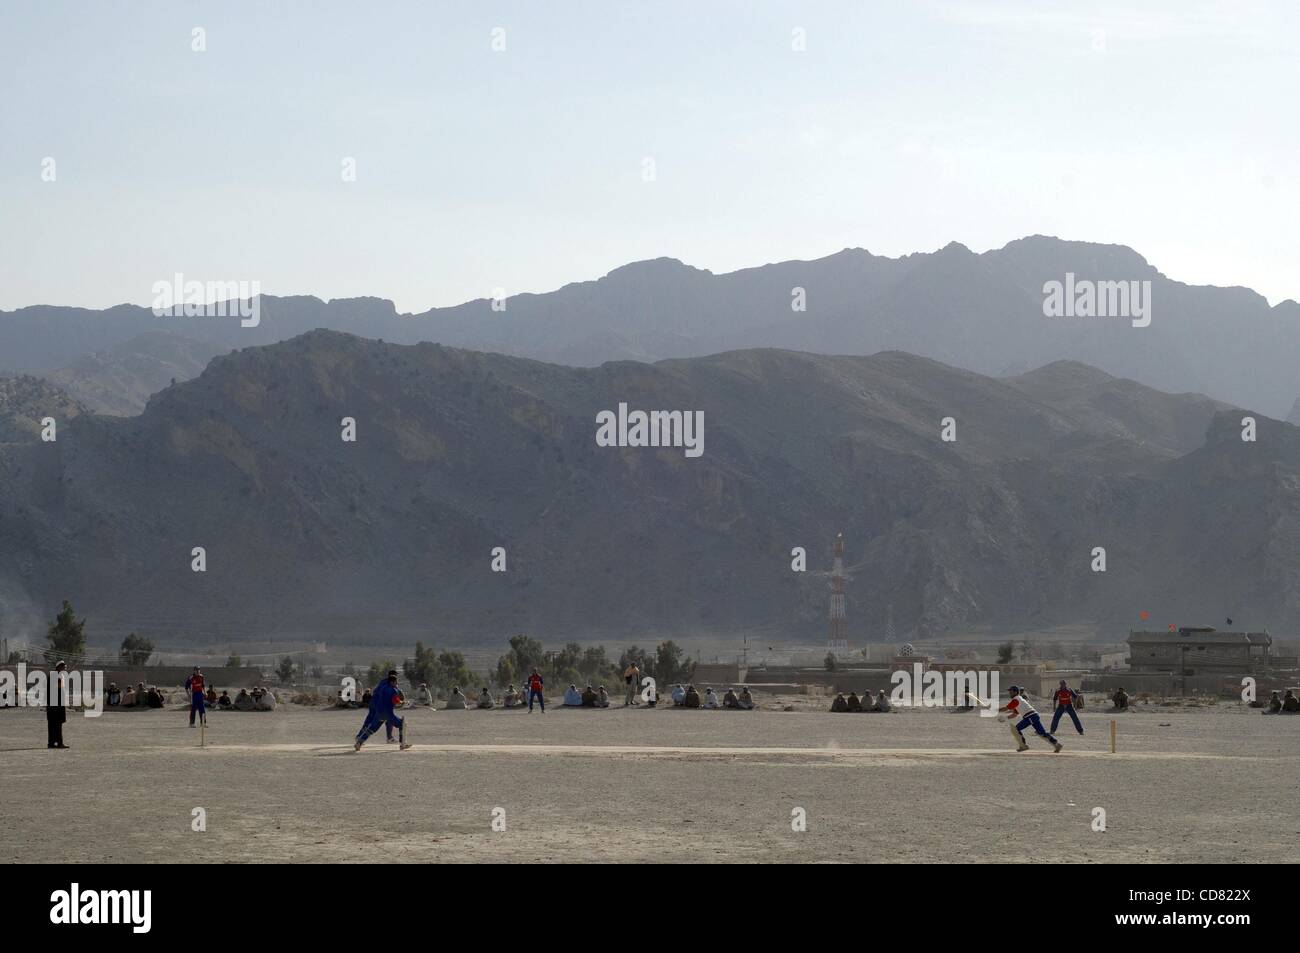 Apr 03, 2008 - Tribal Area, PAKISTAN -  Pashtuns play cricket in the federally administered tribal areas of Pakistan, less than 50 kilometers from the Afghan border. The region's residents are known to hide Taliban and Al Qaeda militants in the mountainous autonomous area.  PICTURED: February 24, 20 Stock Photo